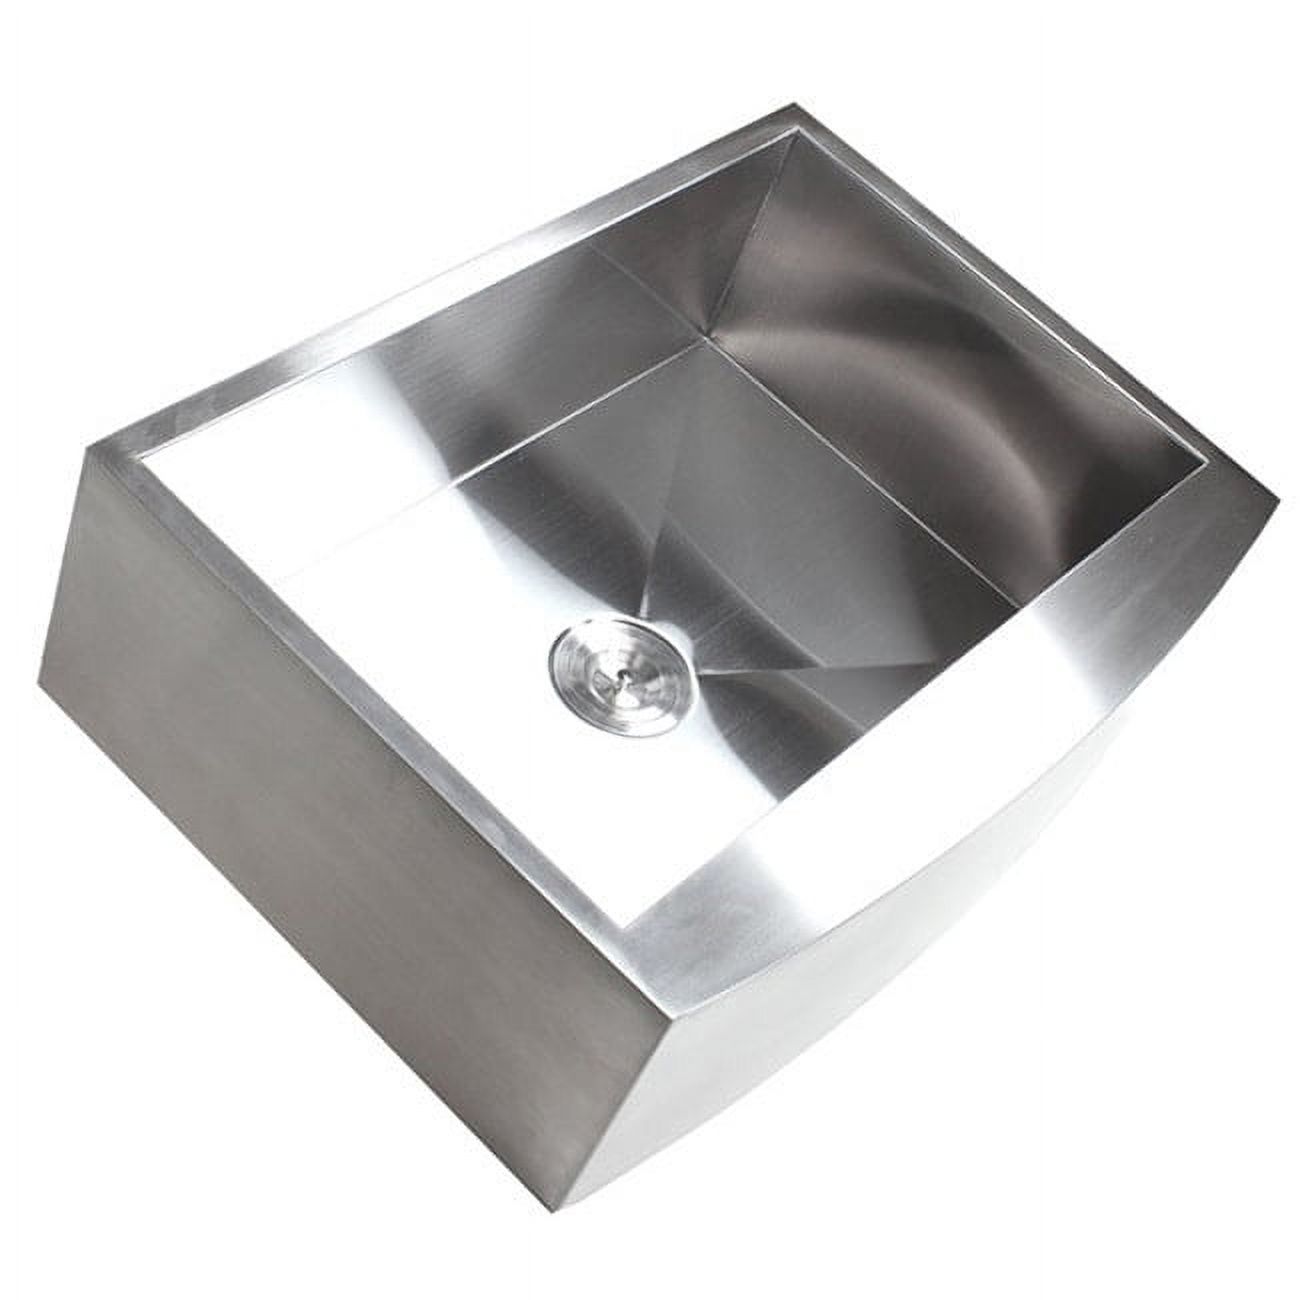 Contempo Living Inc 30-inch Stainless Steel Farmhouse Single Bowl Kitchen Sink - image 3 of 5